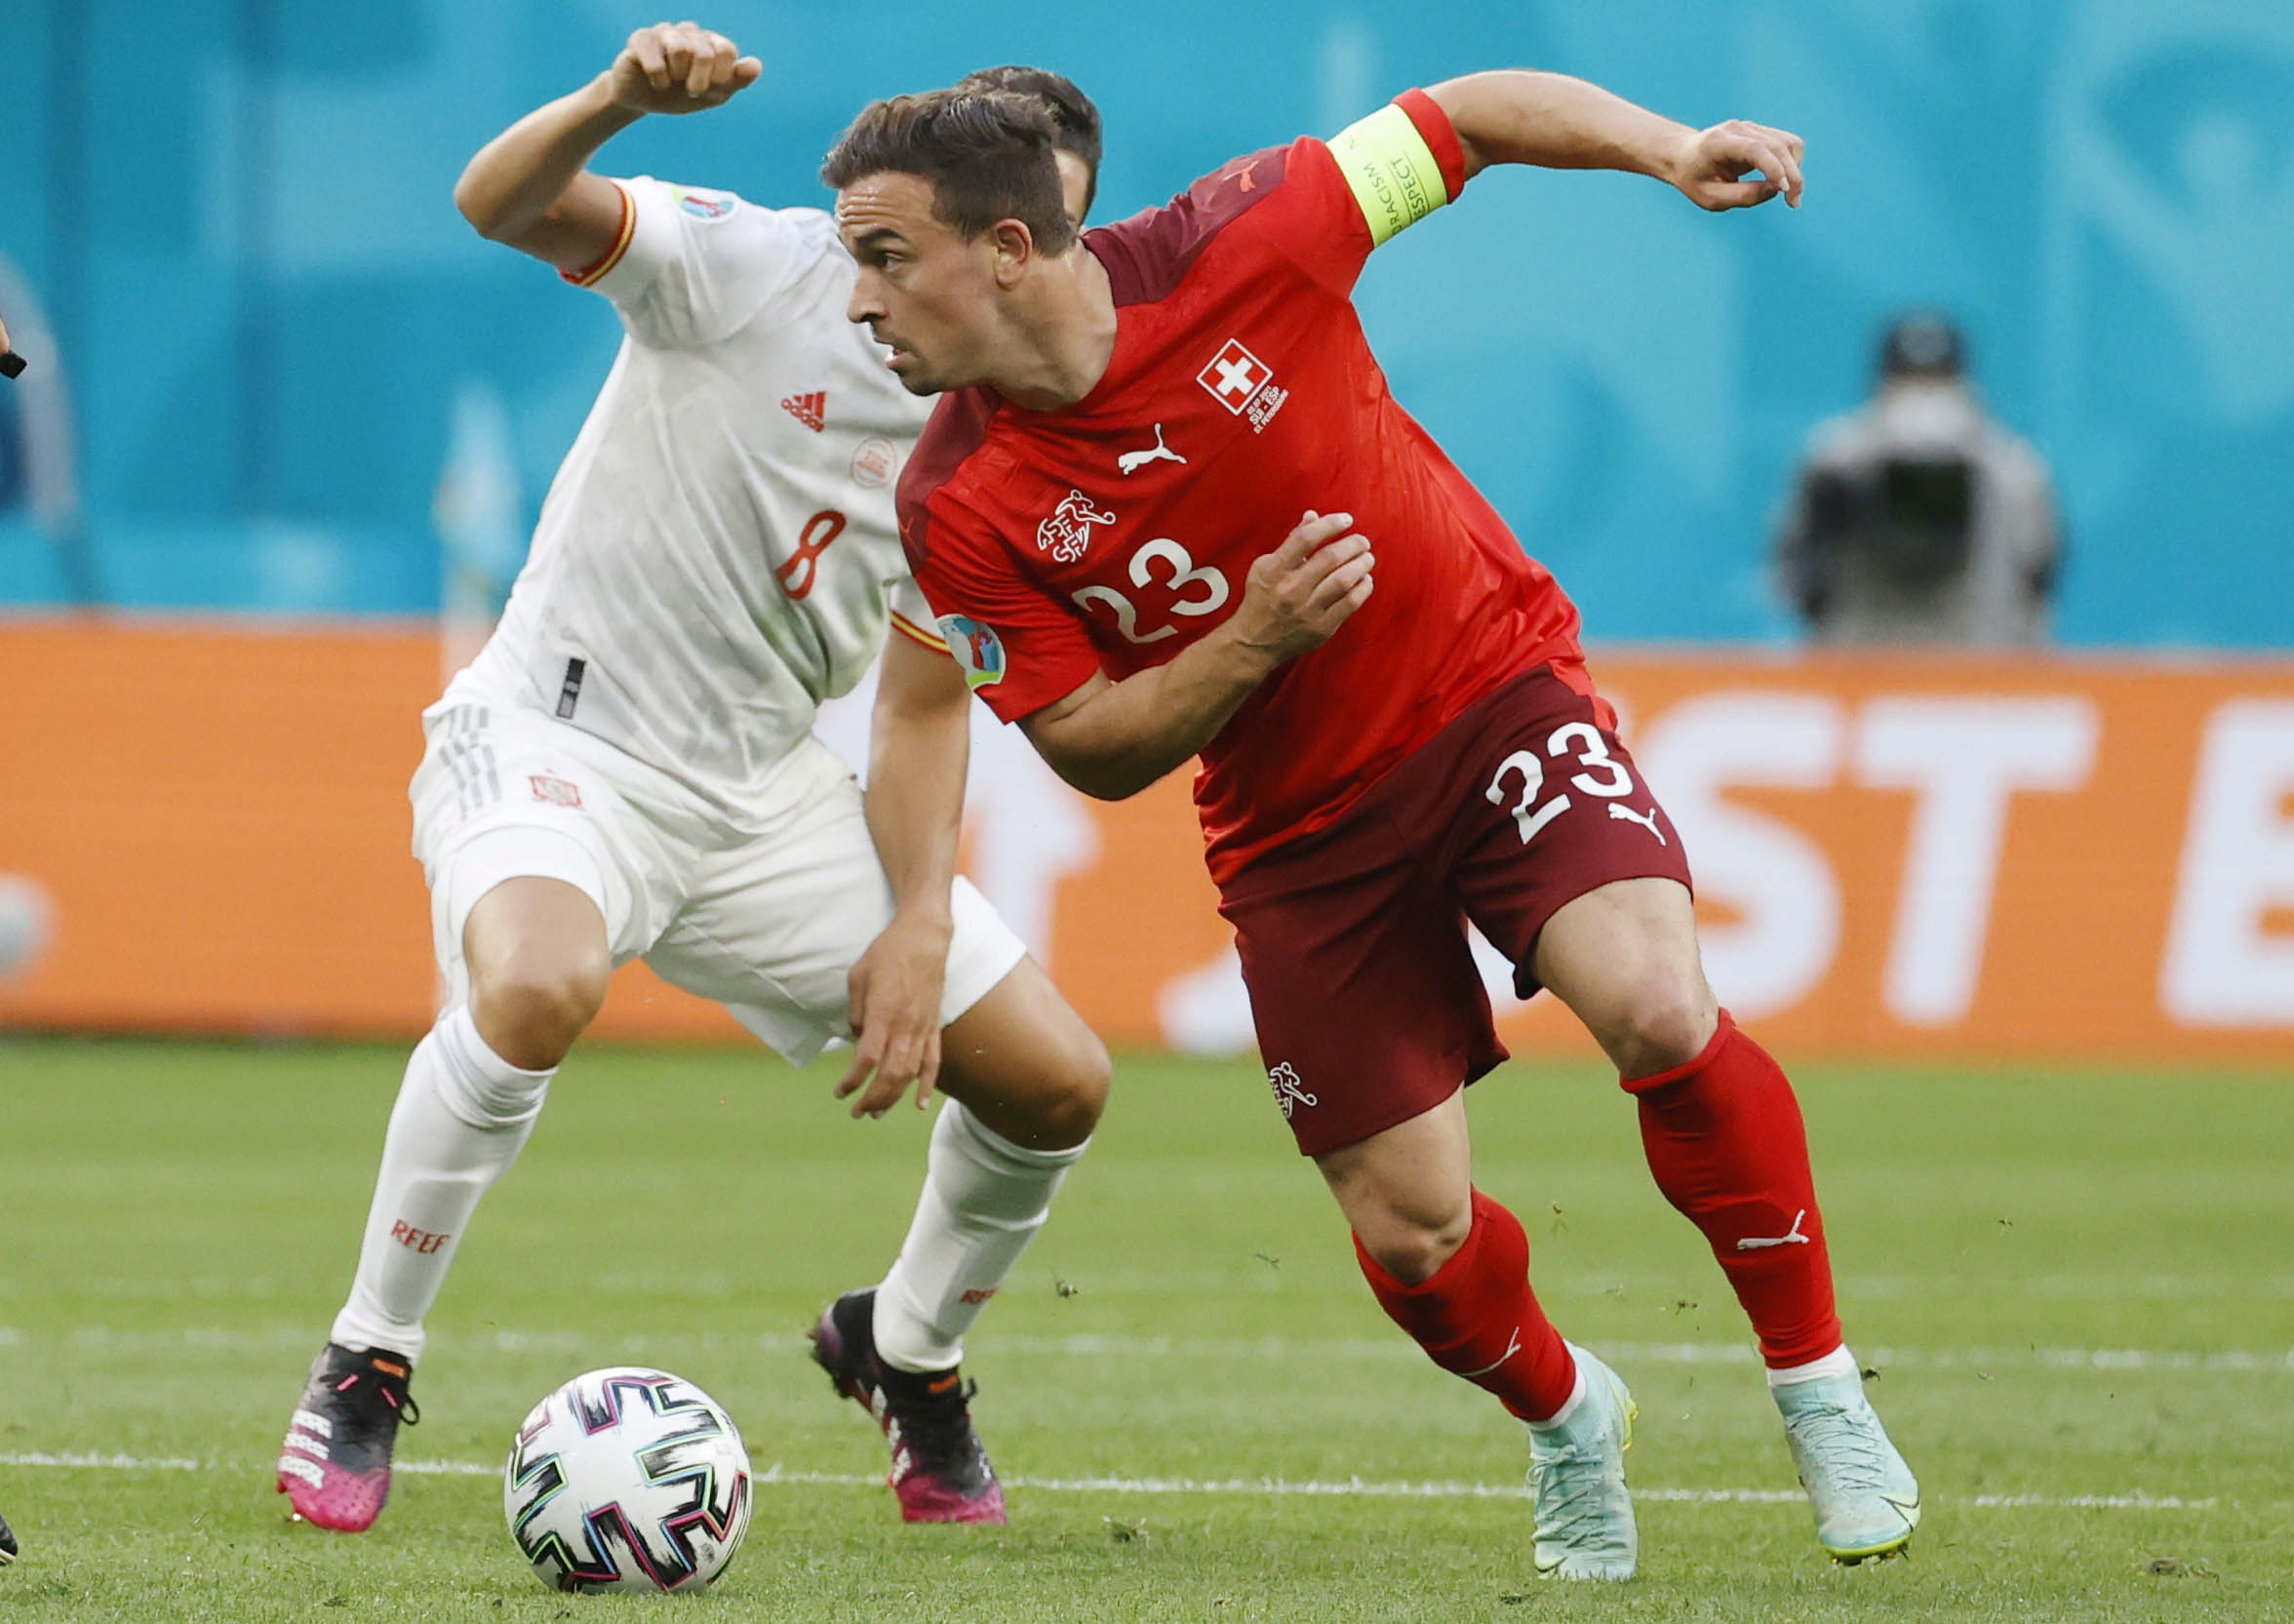 epa09318286 Xherdan Shaqiri of Switzerland in action agiant Spain's Koke (L) during the UEFA EURO 2020 quarter final match between Switzerland and Spain in St.Petersburg, Russia, 02 July 2021.  EPA/Anatoly Maltsev / POOL (RESTRICTIONS: For editorial news reporting purposes only. Images must appear as still images and must not emulate match action video footage. Photographs published in online publications shall have an interval of at least 20 seconds between the posting.)